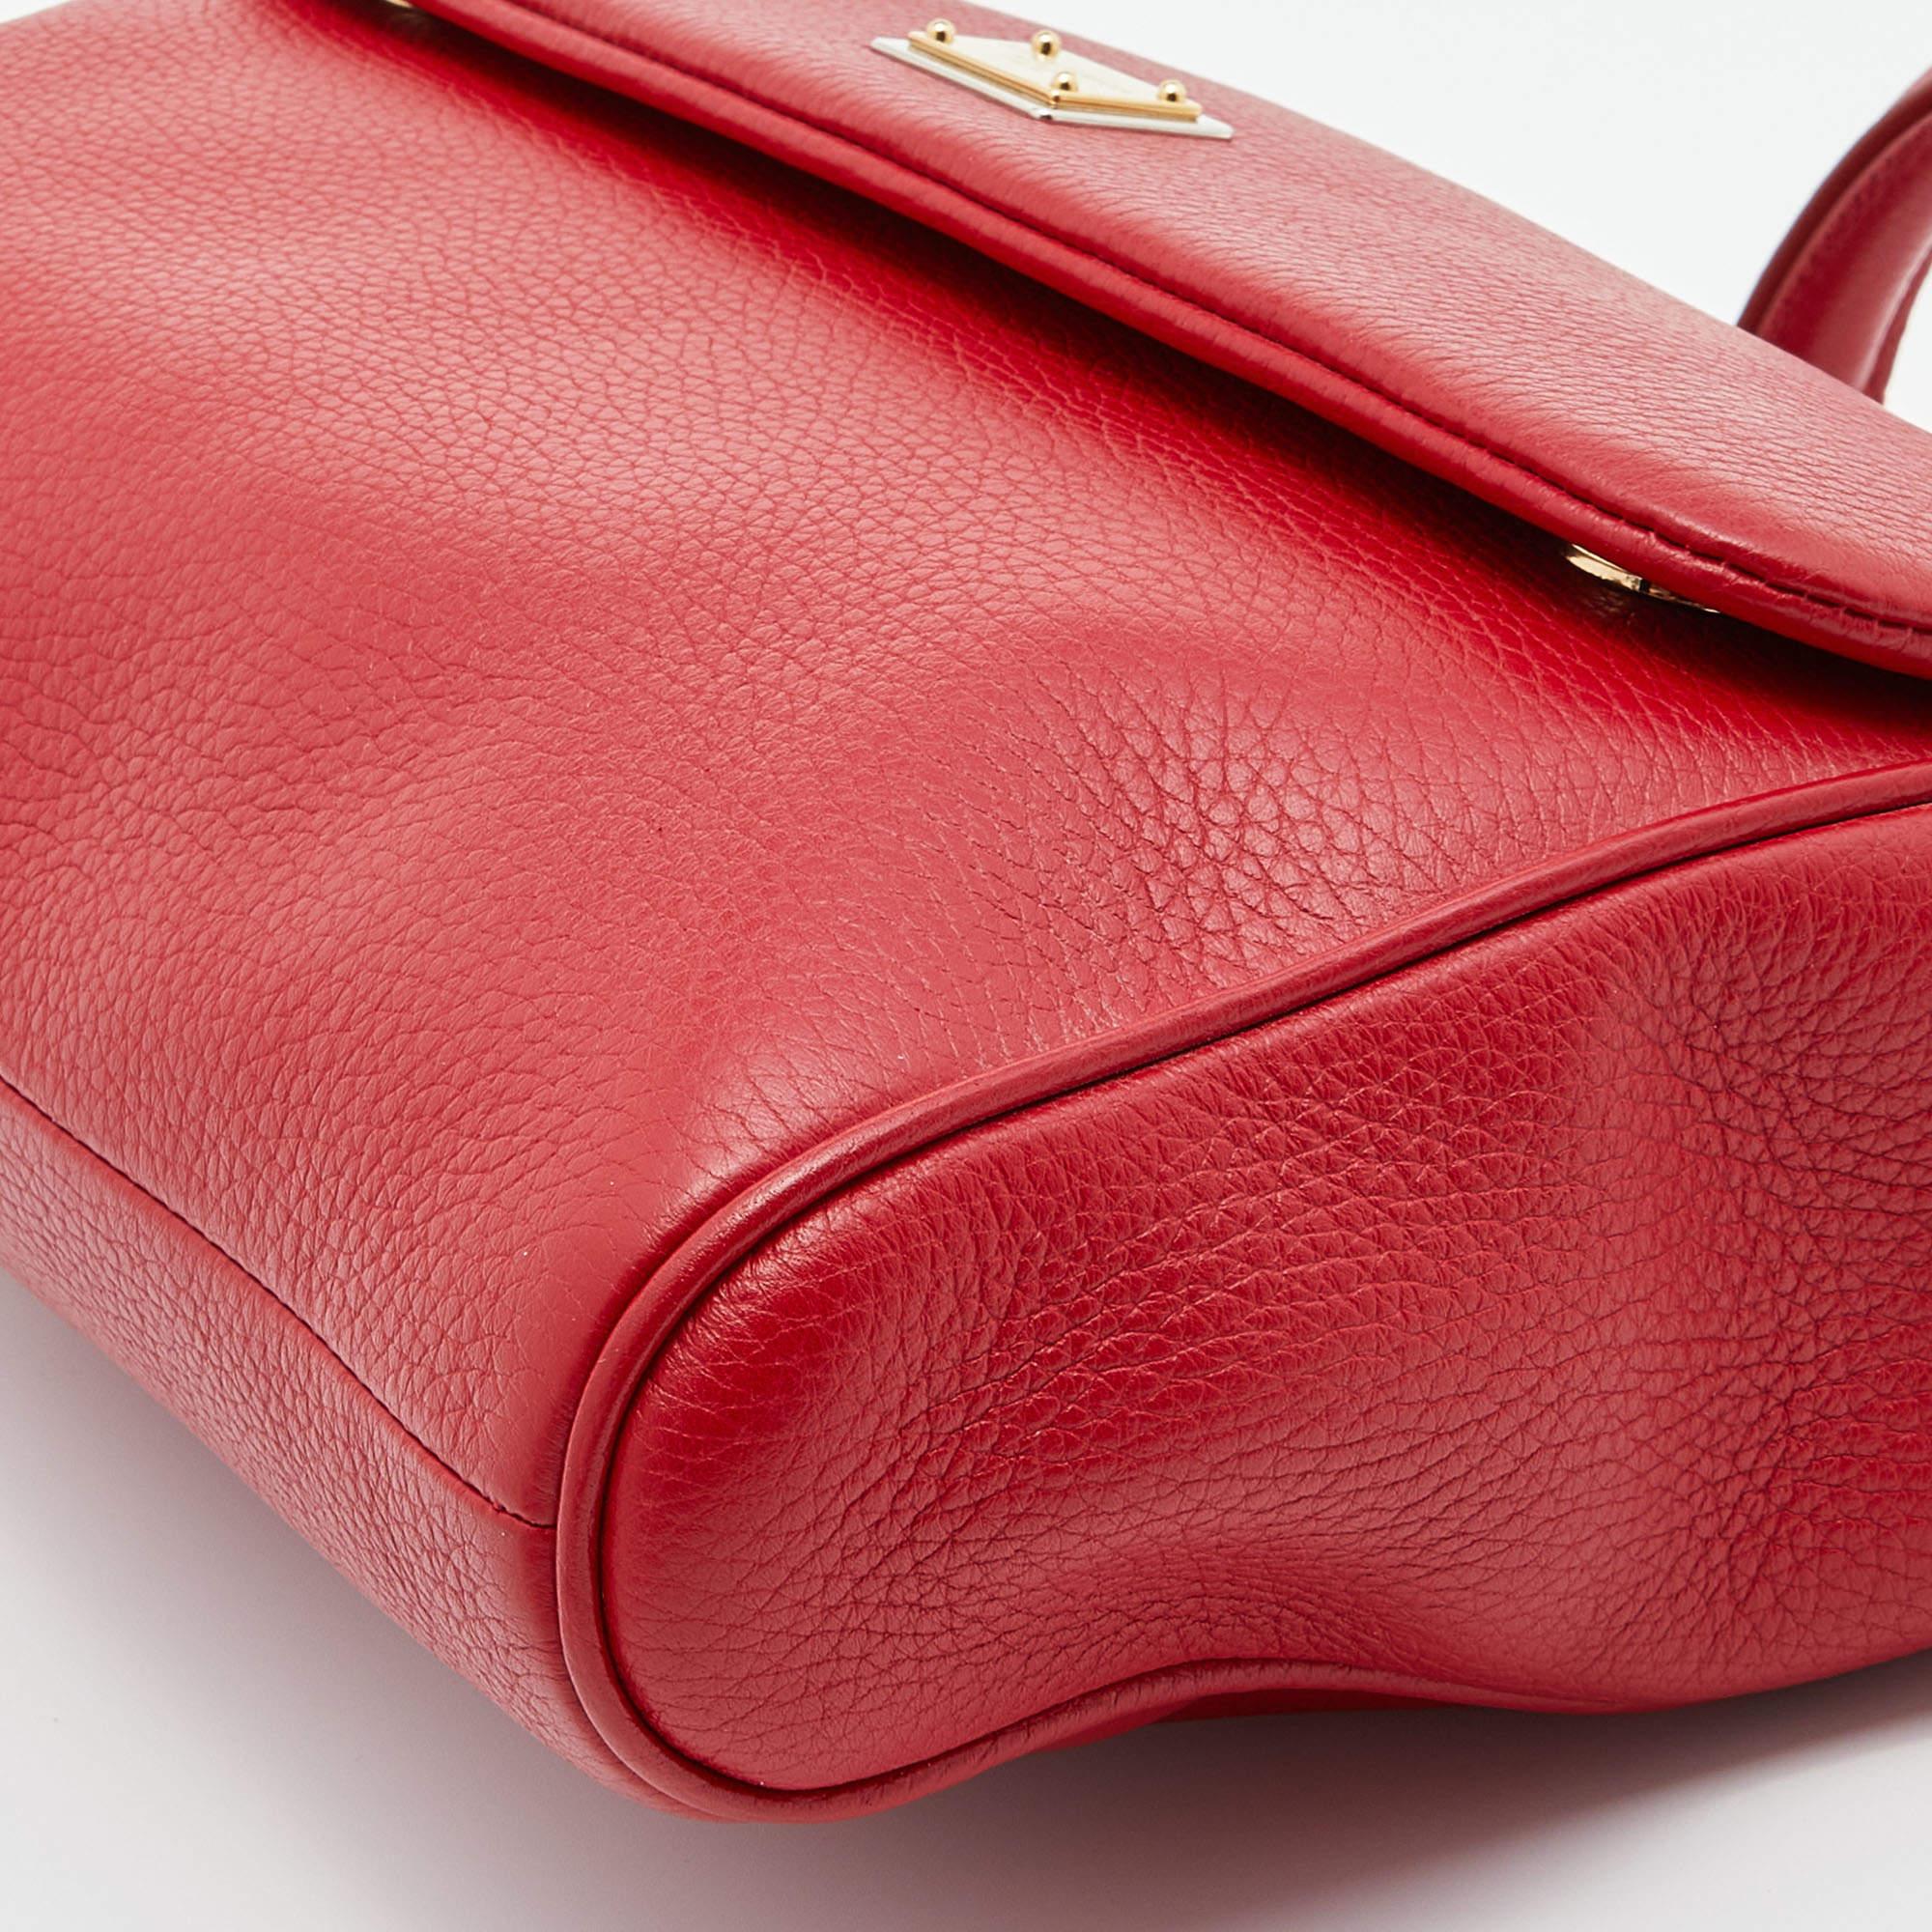 Dolce & Gabbana Red Leather Miss Sicily Top Handle Bag 7